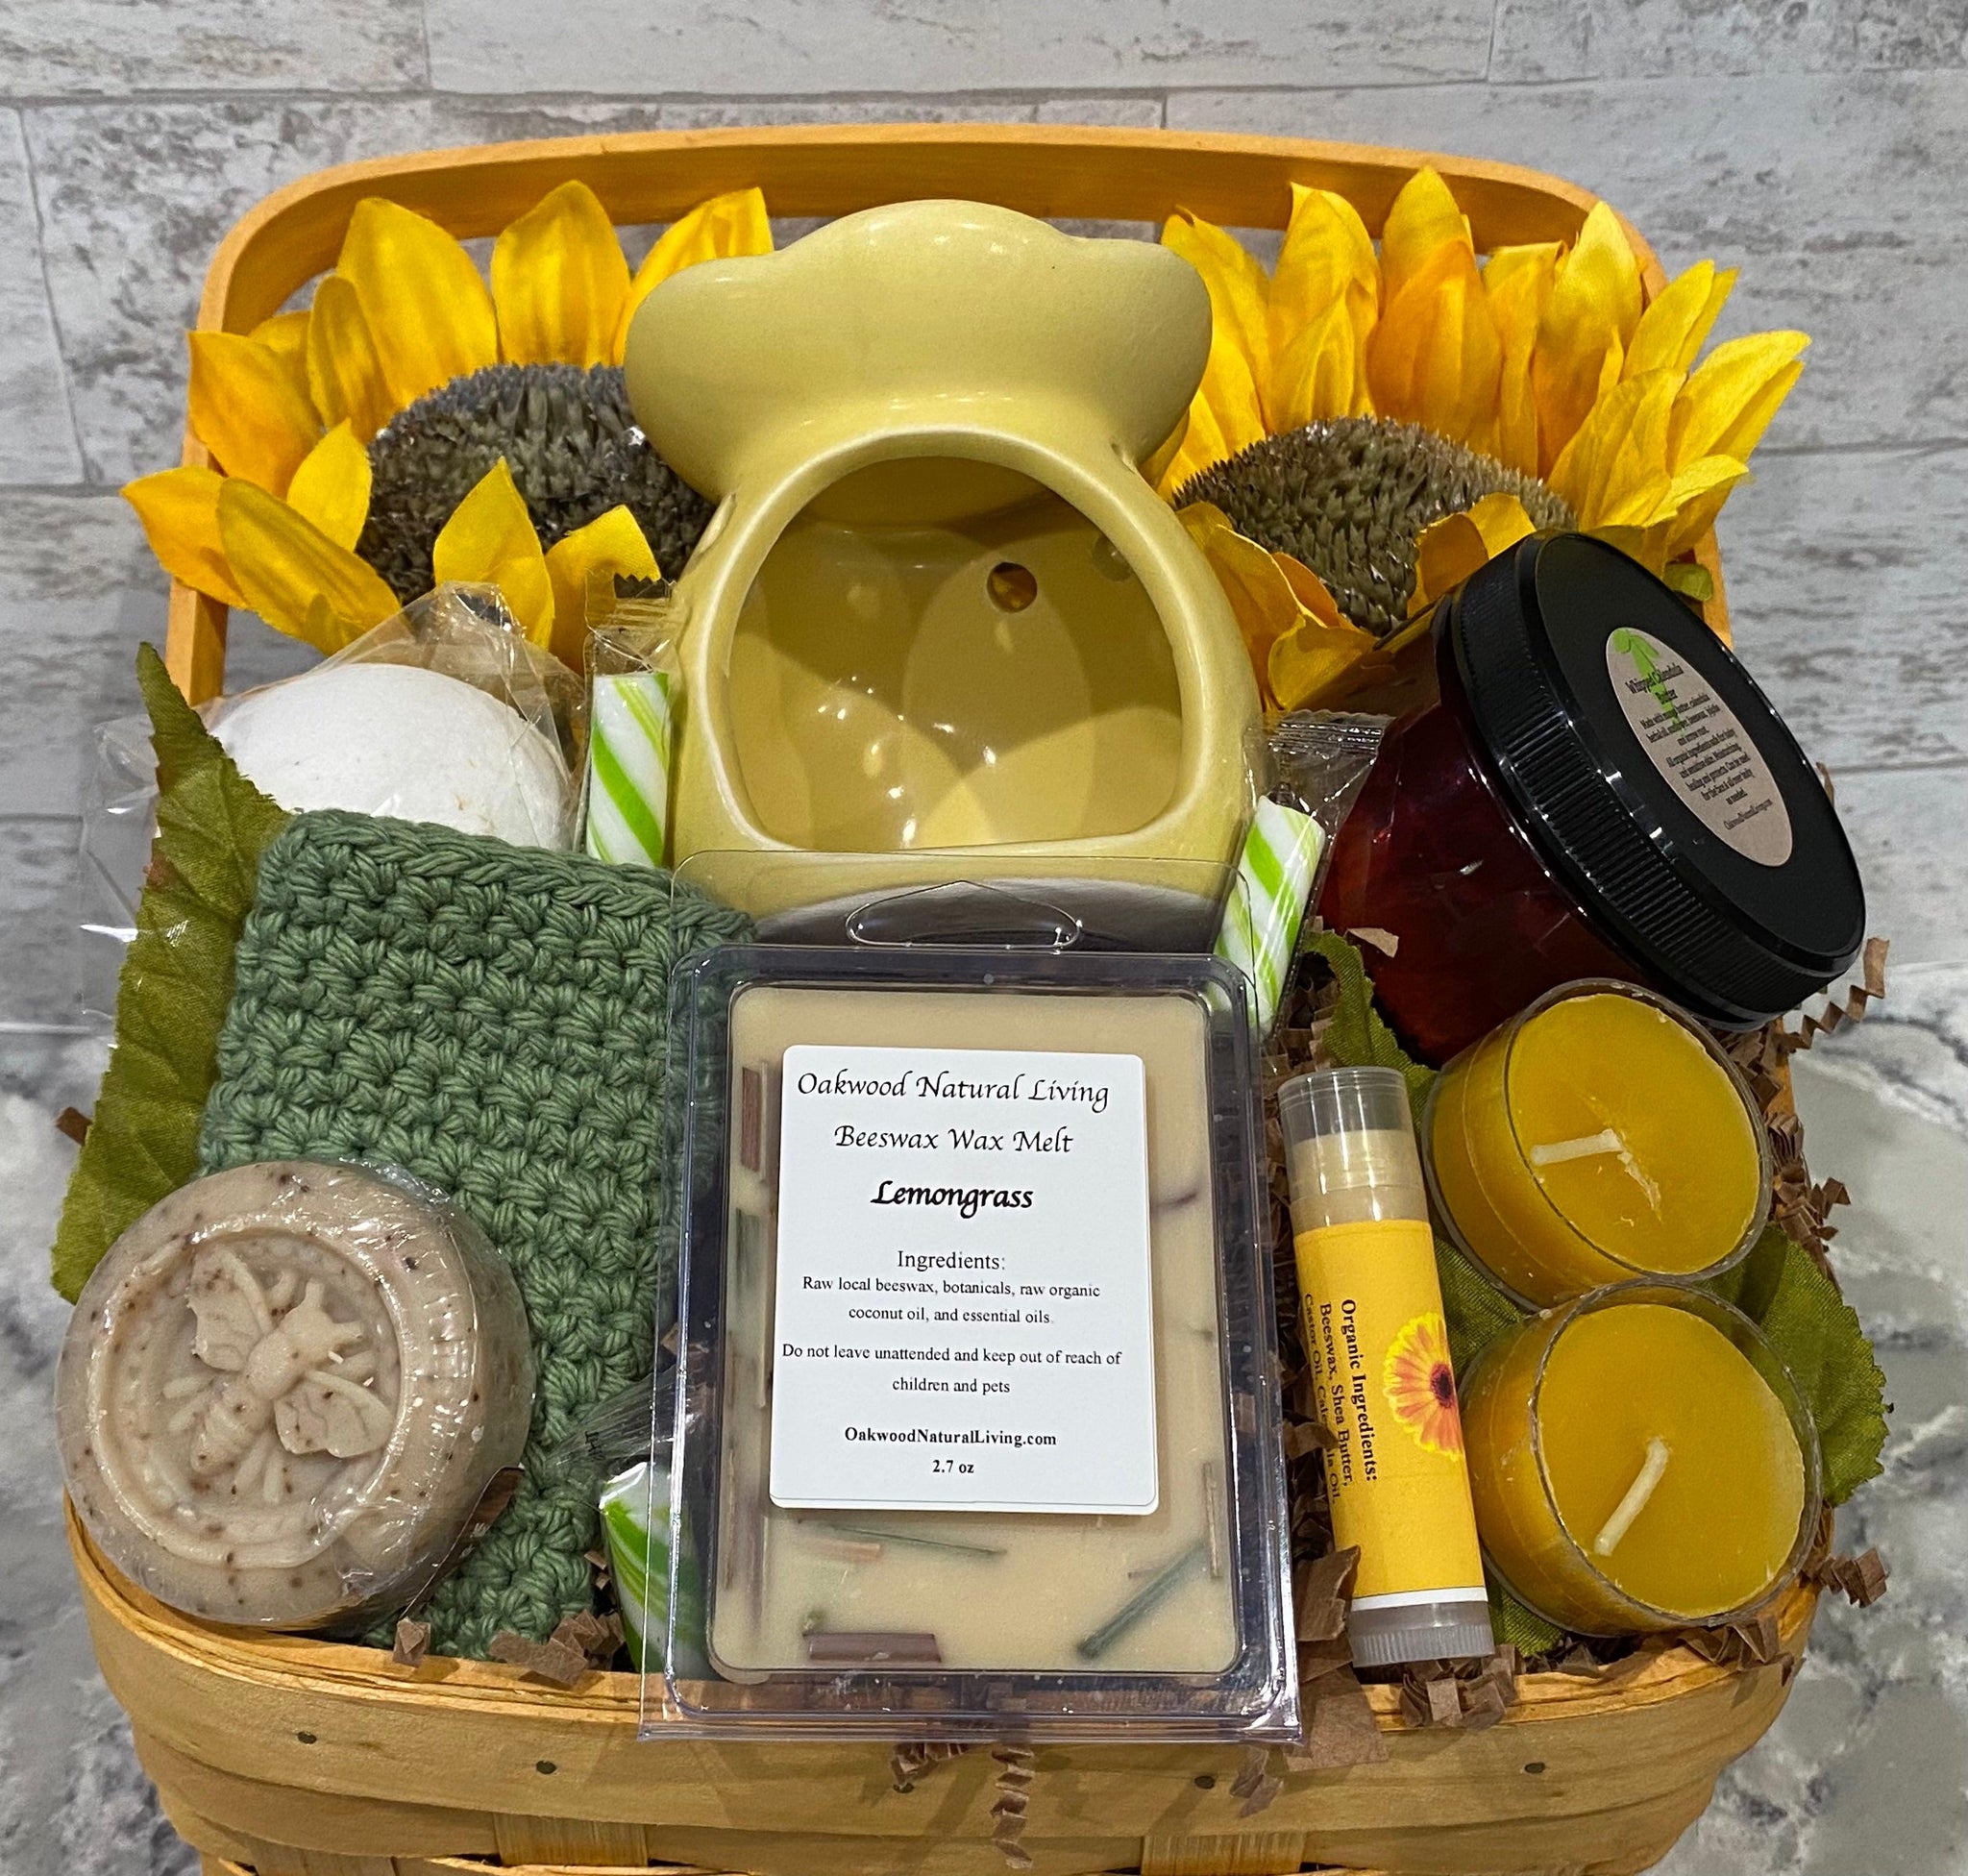 Custom and Unique Themed Gift Baskets sure to please